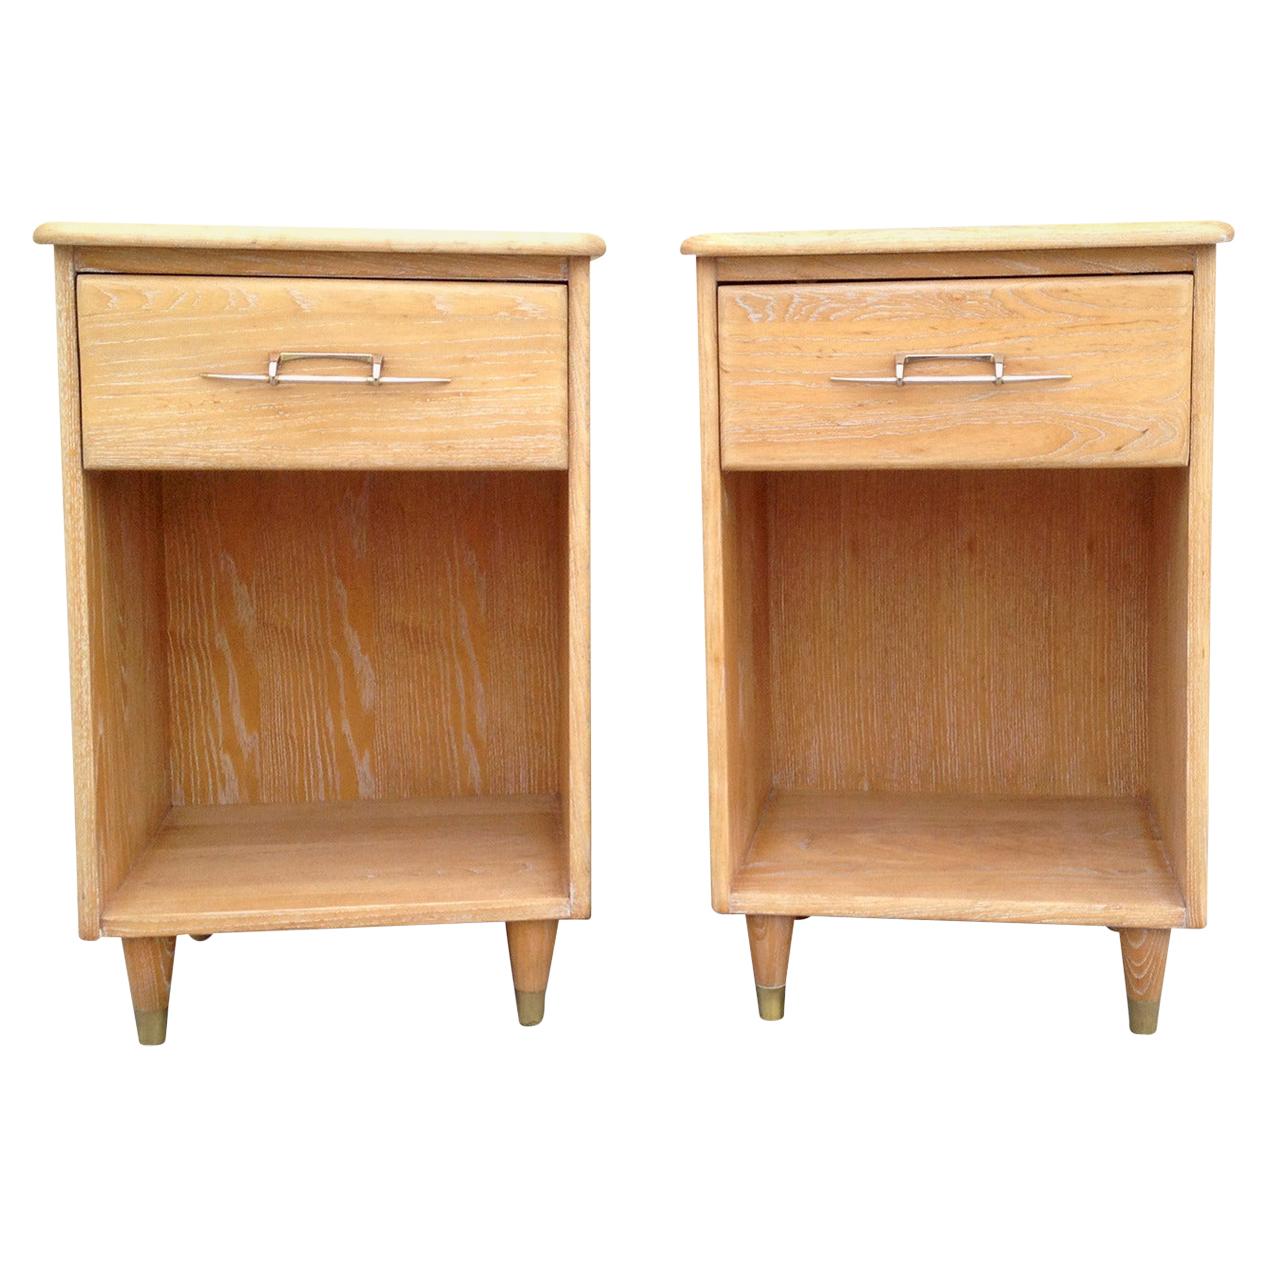 Narrow Pair of 1950s Nightstands with Subtle Cerused Finish